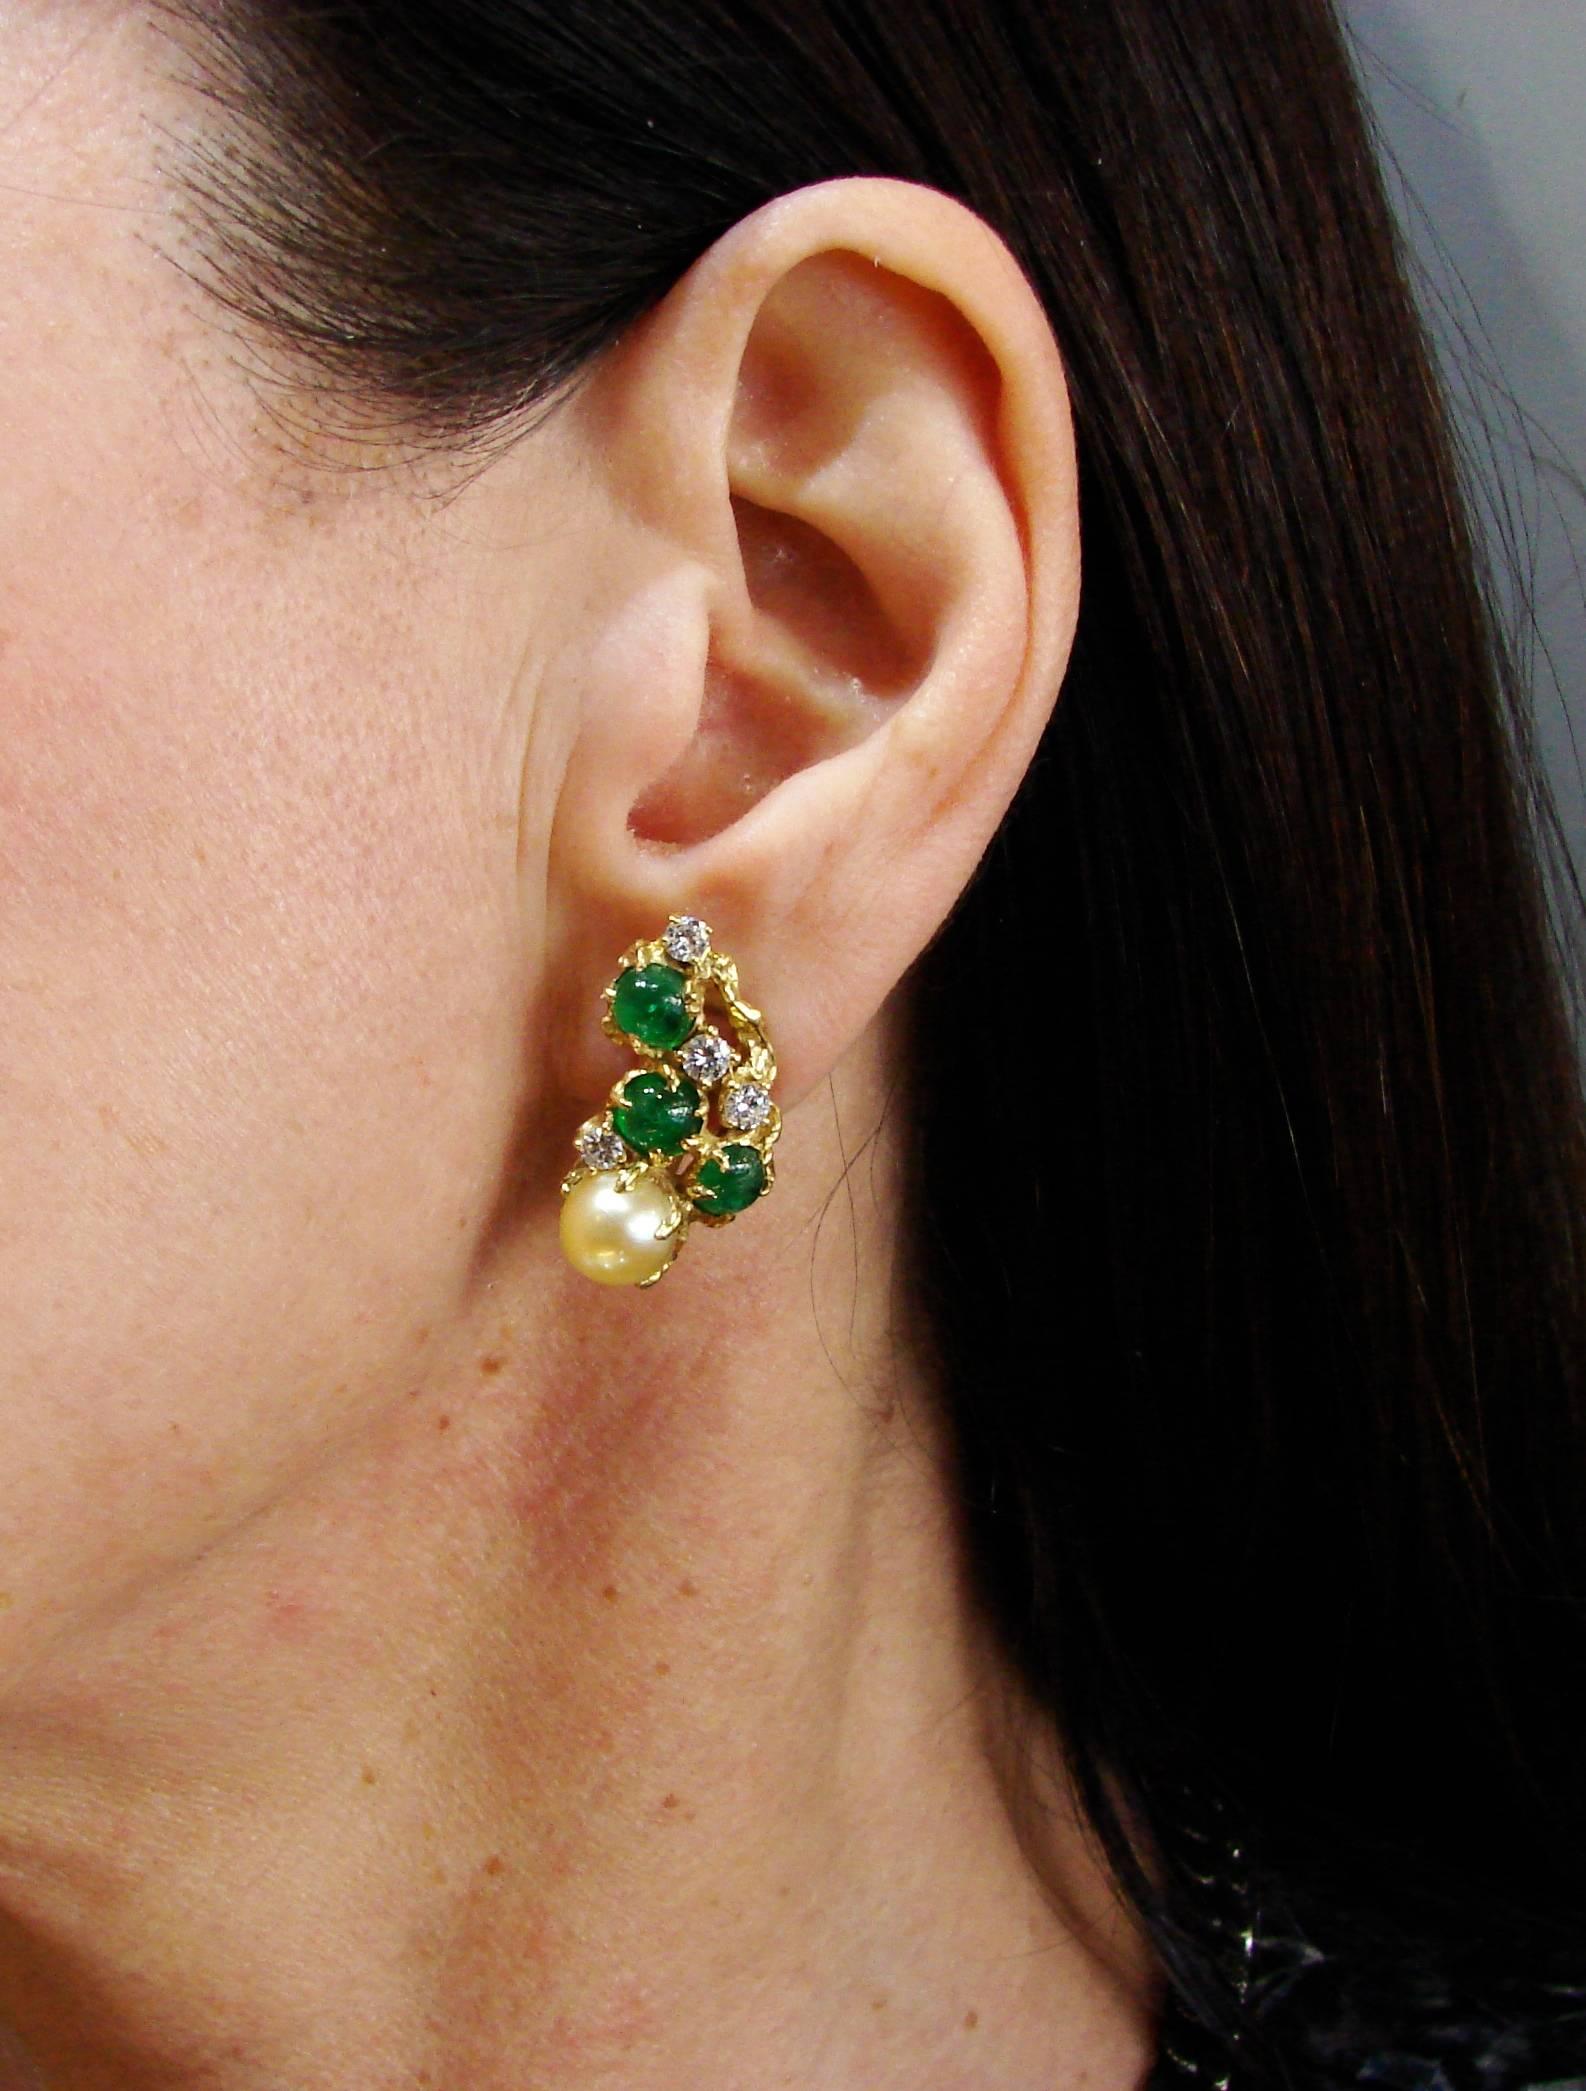 Lovely colorful earrings created by Arthur King in the 1970s. Feminine, warm and wearable, the earrings are a great addition to your jewelry collection.
The earrings feature a golden South Sea pearl, accented with cabochon emeralds (5.68 carats